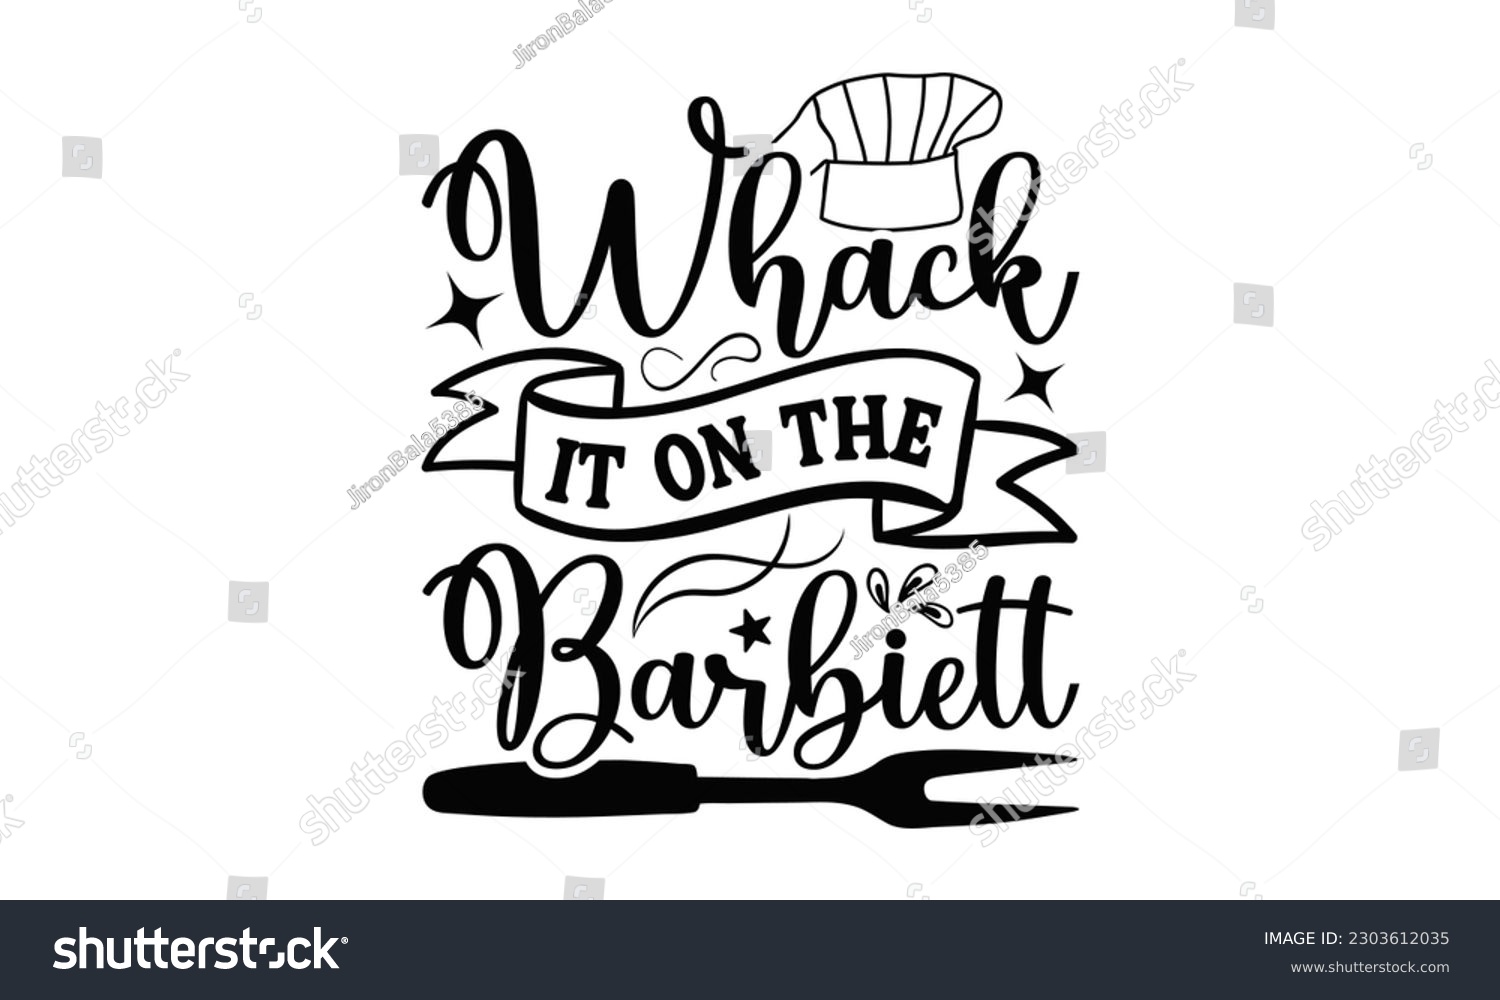 SVG of Whack It On The Barbie - Barbecue SVG Design, Calligraphy t shirt design, Illustration for prints on t-shirts, bags, posters, cards and Mug.

 svg